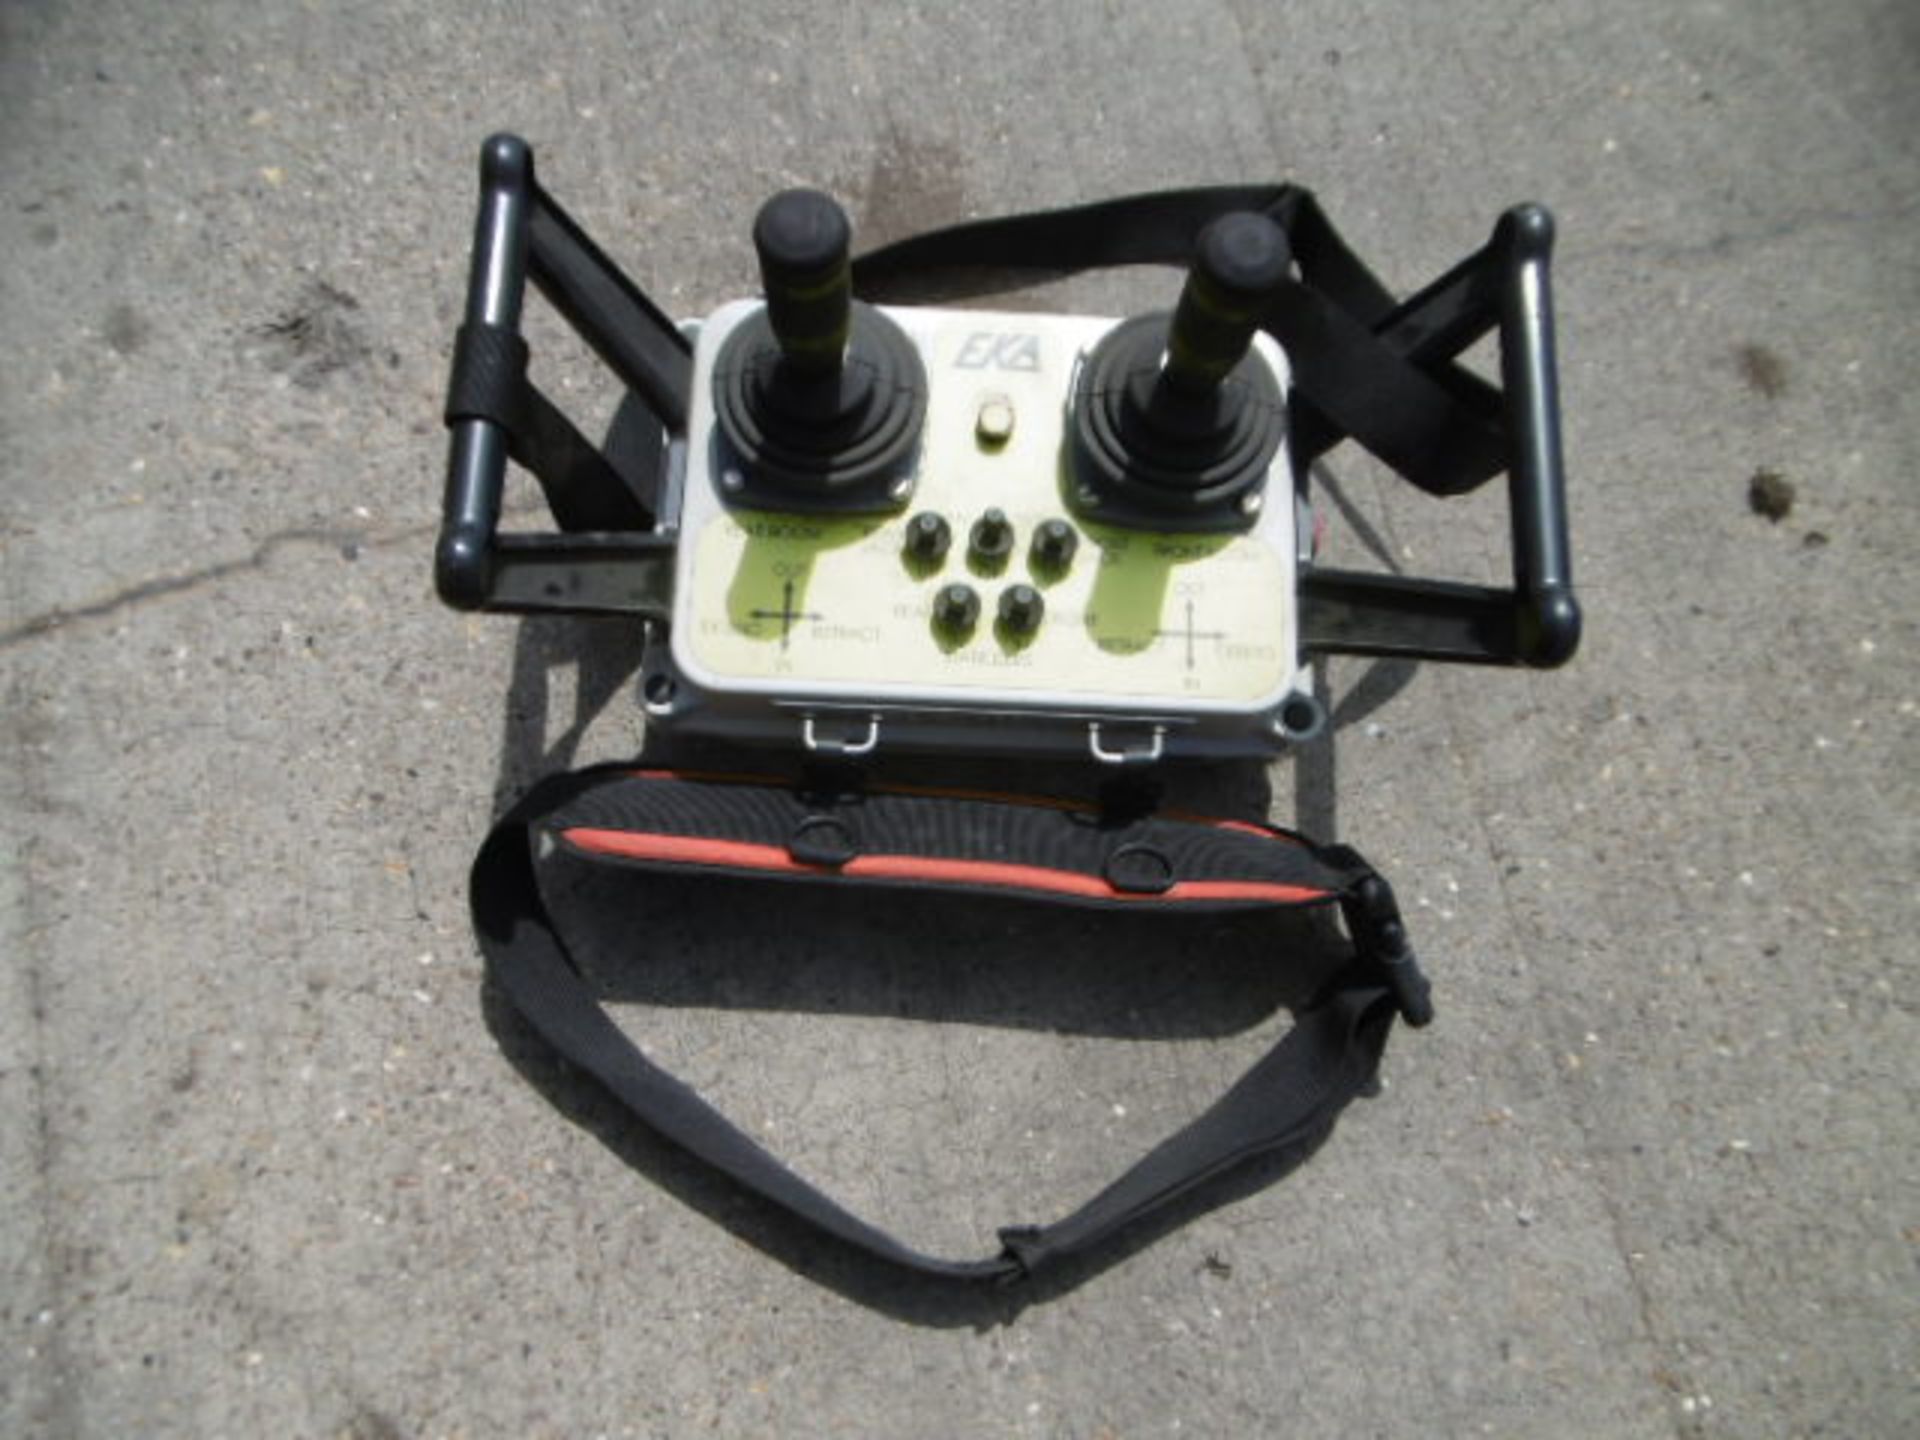 EKA Recovery Unit Remote Control - Image 2 of 5